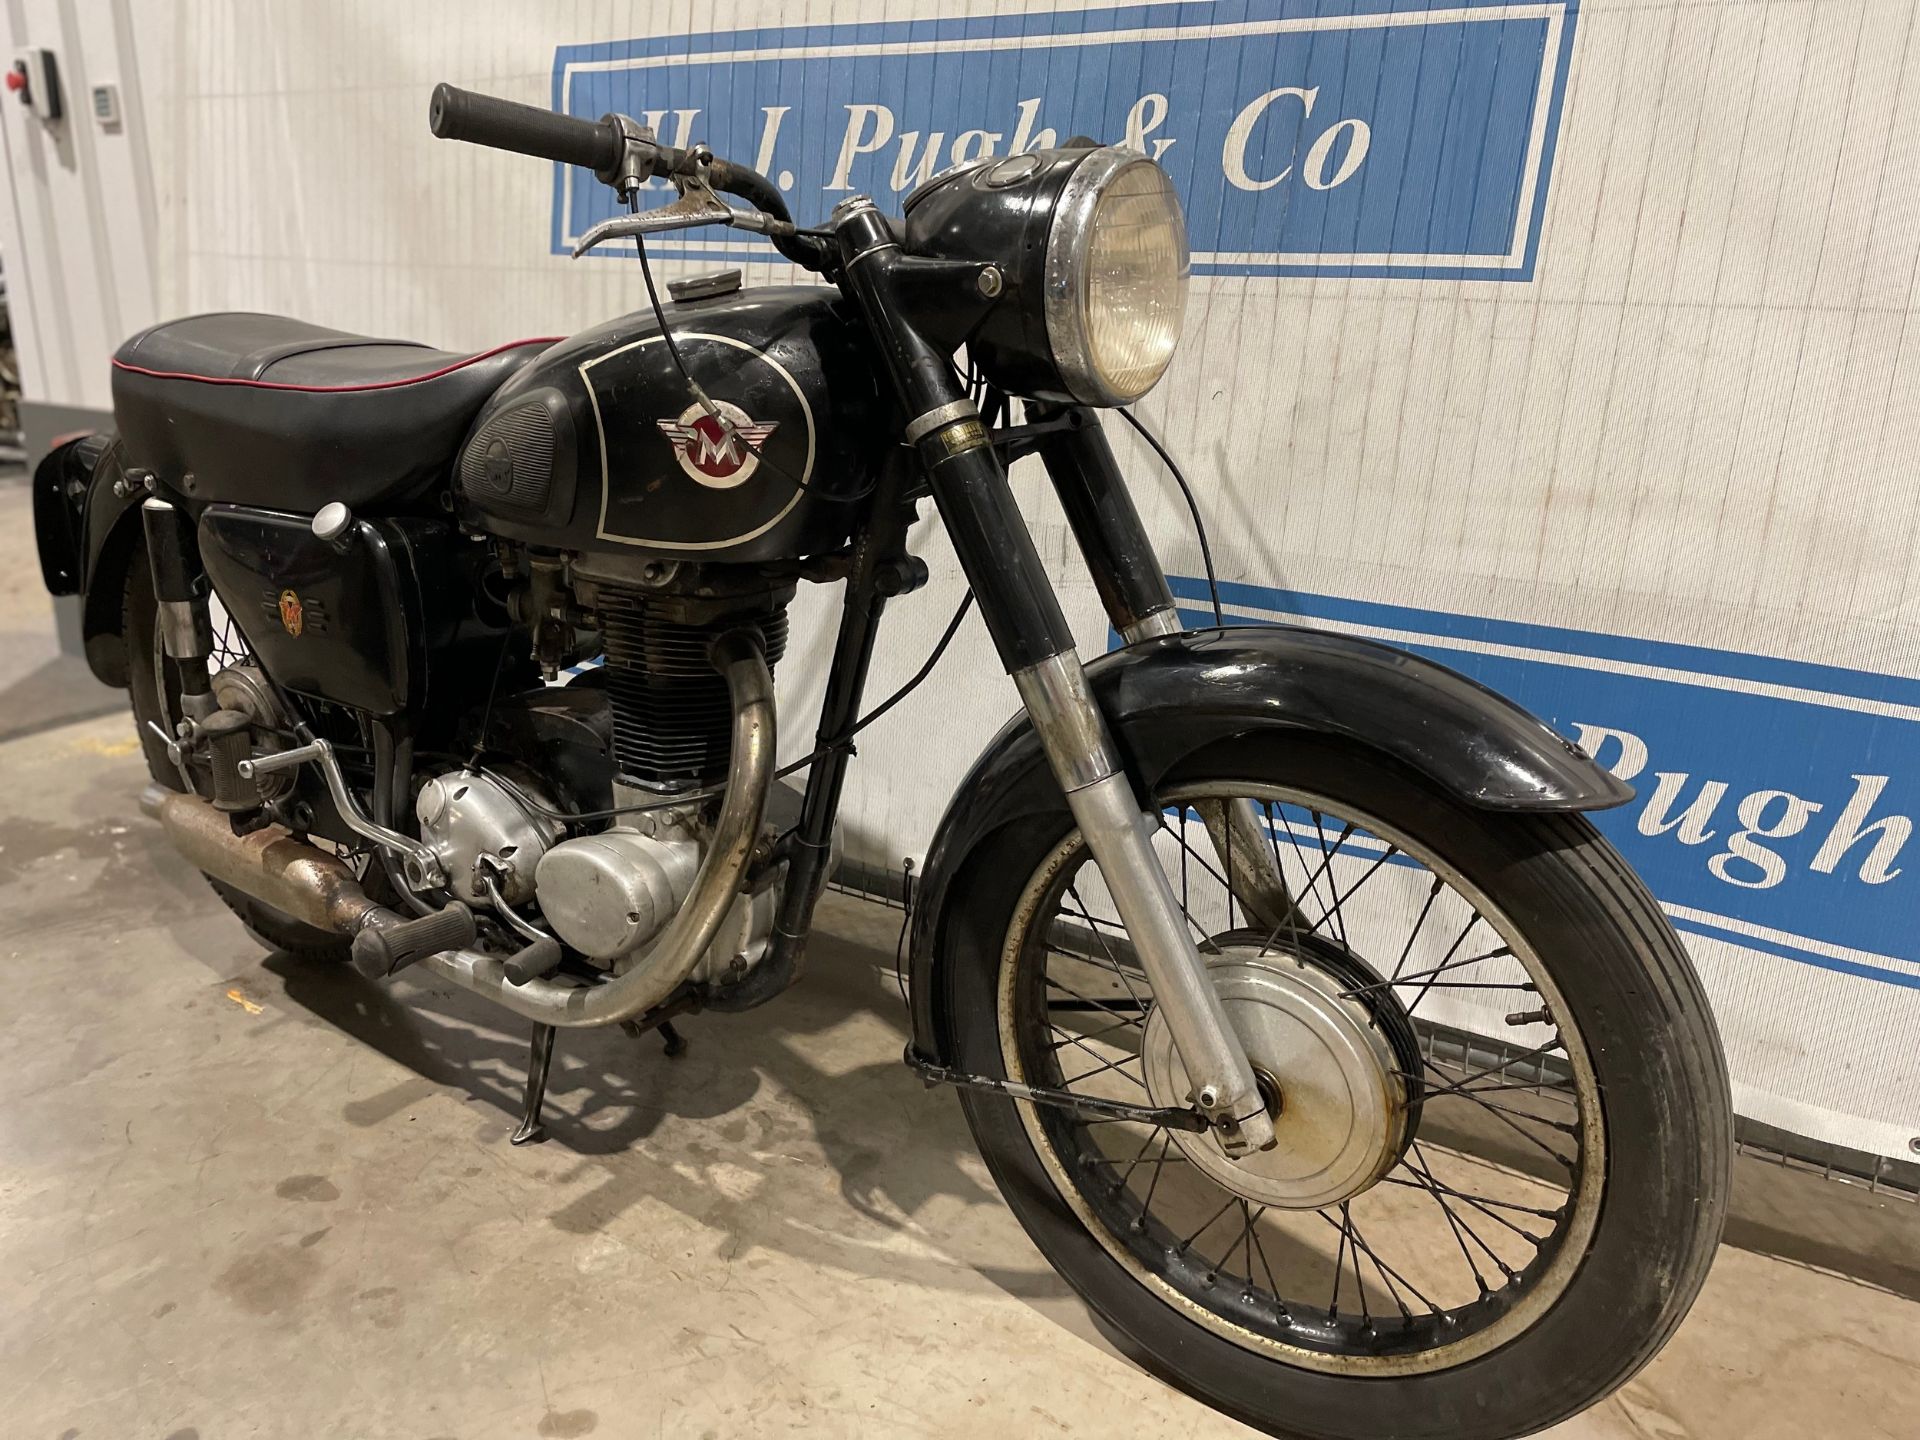 Matchless G3 motorcycle. 1958. 348cc. Has run recently but needs a new clutch. Reg 660 XVU. V5 - Image 4 of 12